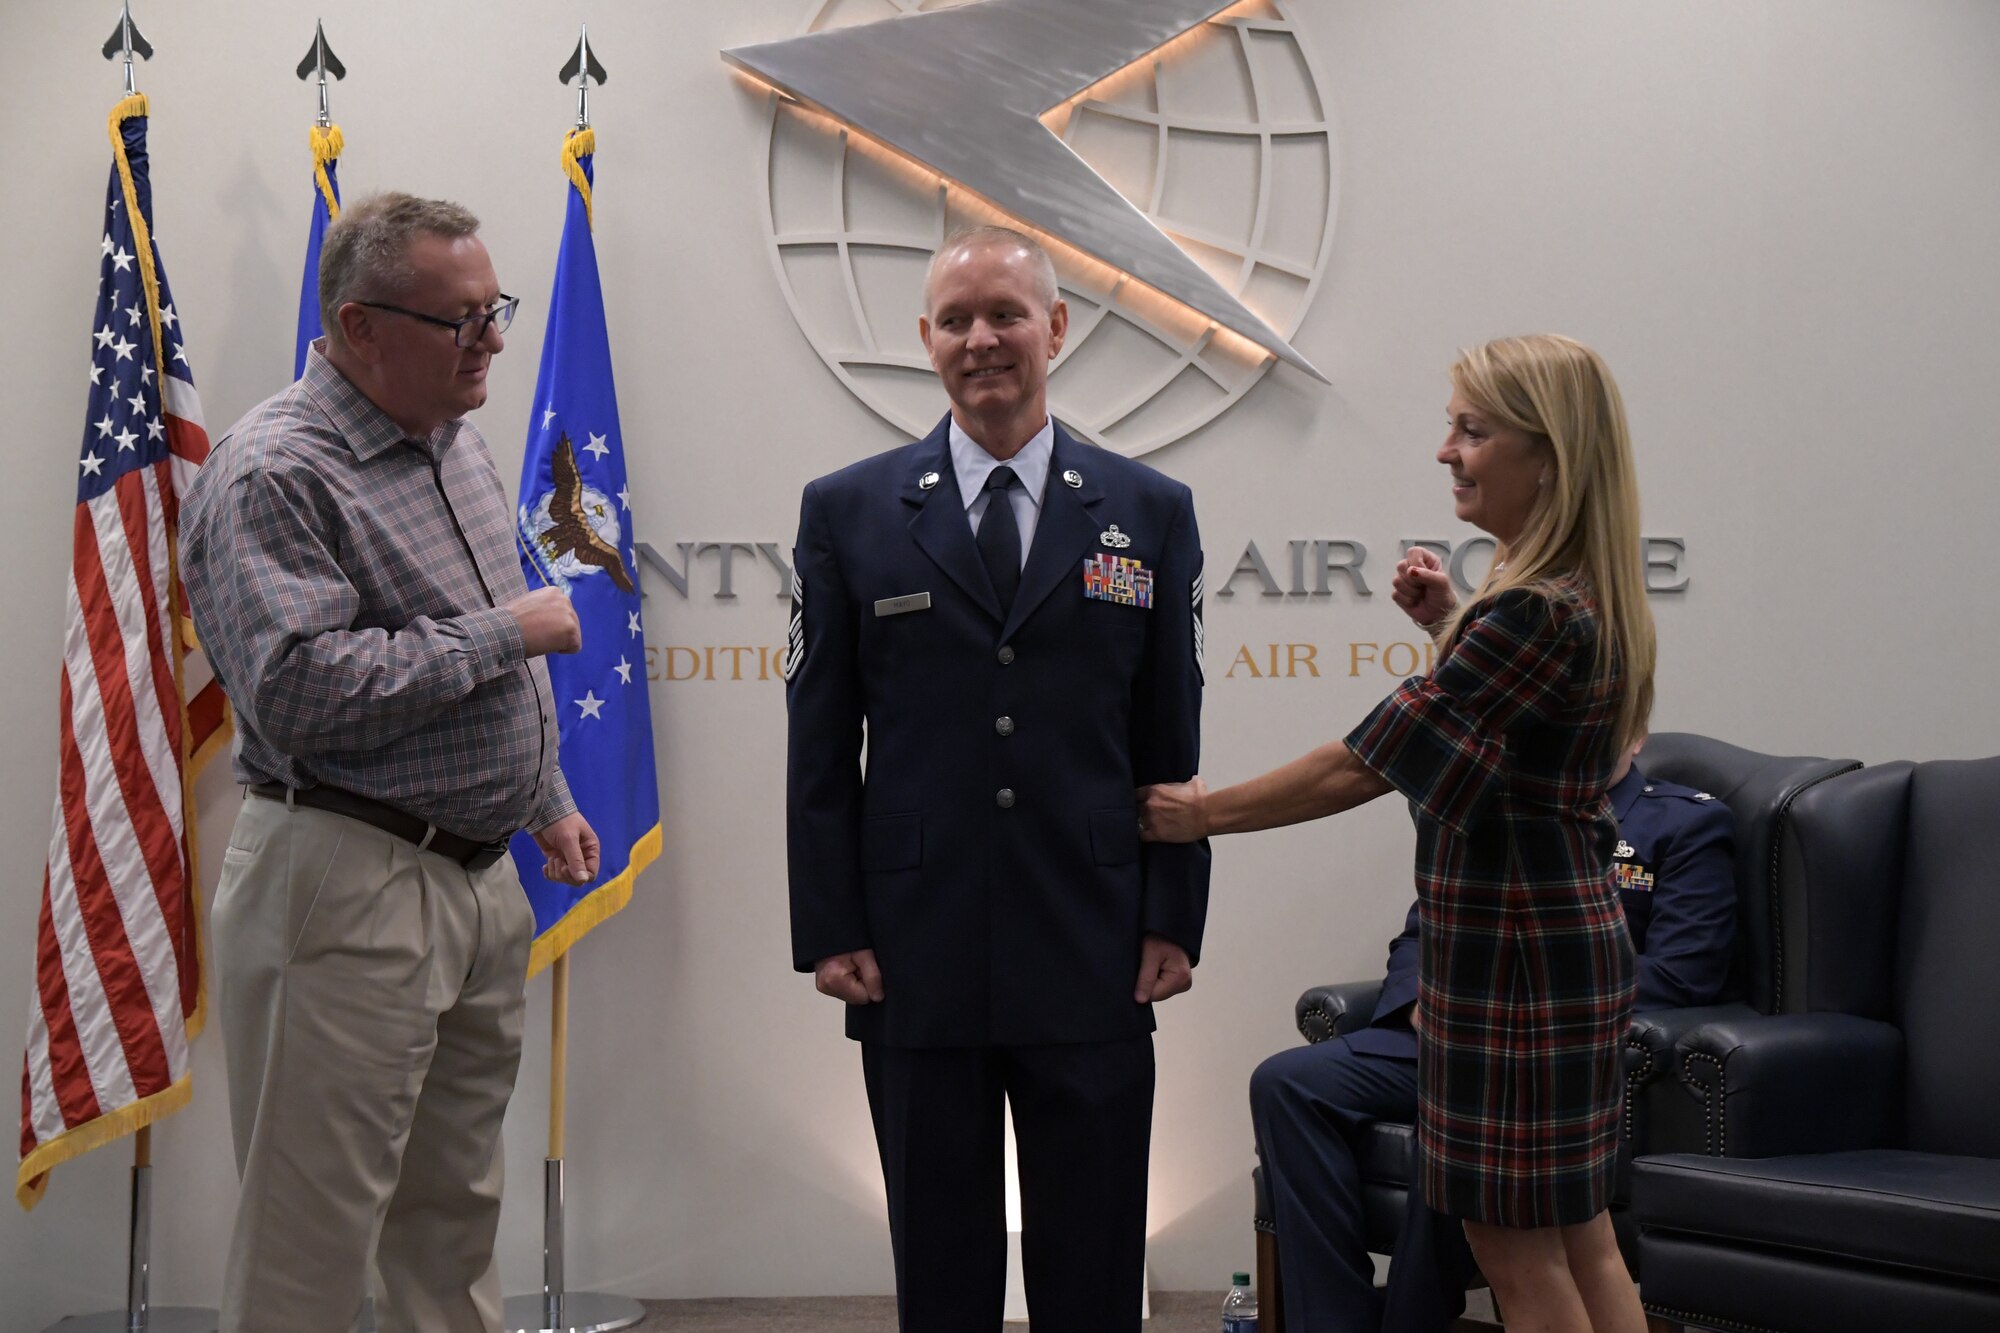 Senior Master Sgt. Carlton Mayo, 22nd Air Force aircraft maintenance and systems equipment program manager, recently promoted to chief master sergeant during a promotion ceremony held here Dec. 8, 2019. (U.S. Air Force photo/Senior Airman Justin Clayvon)